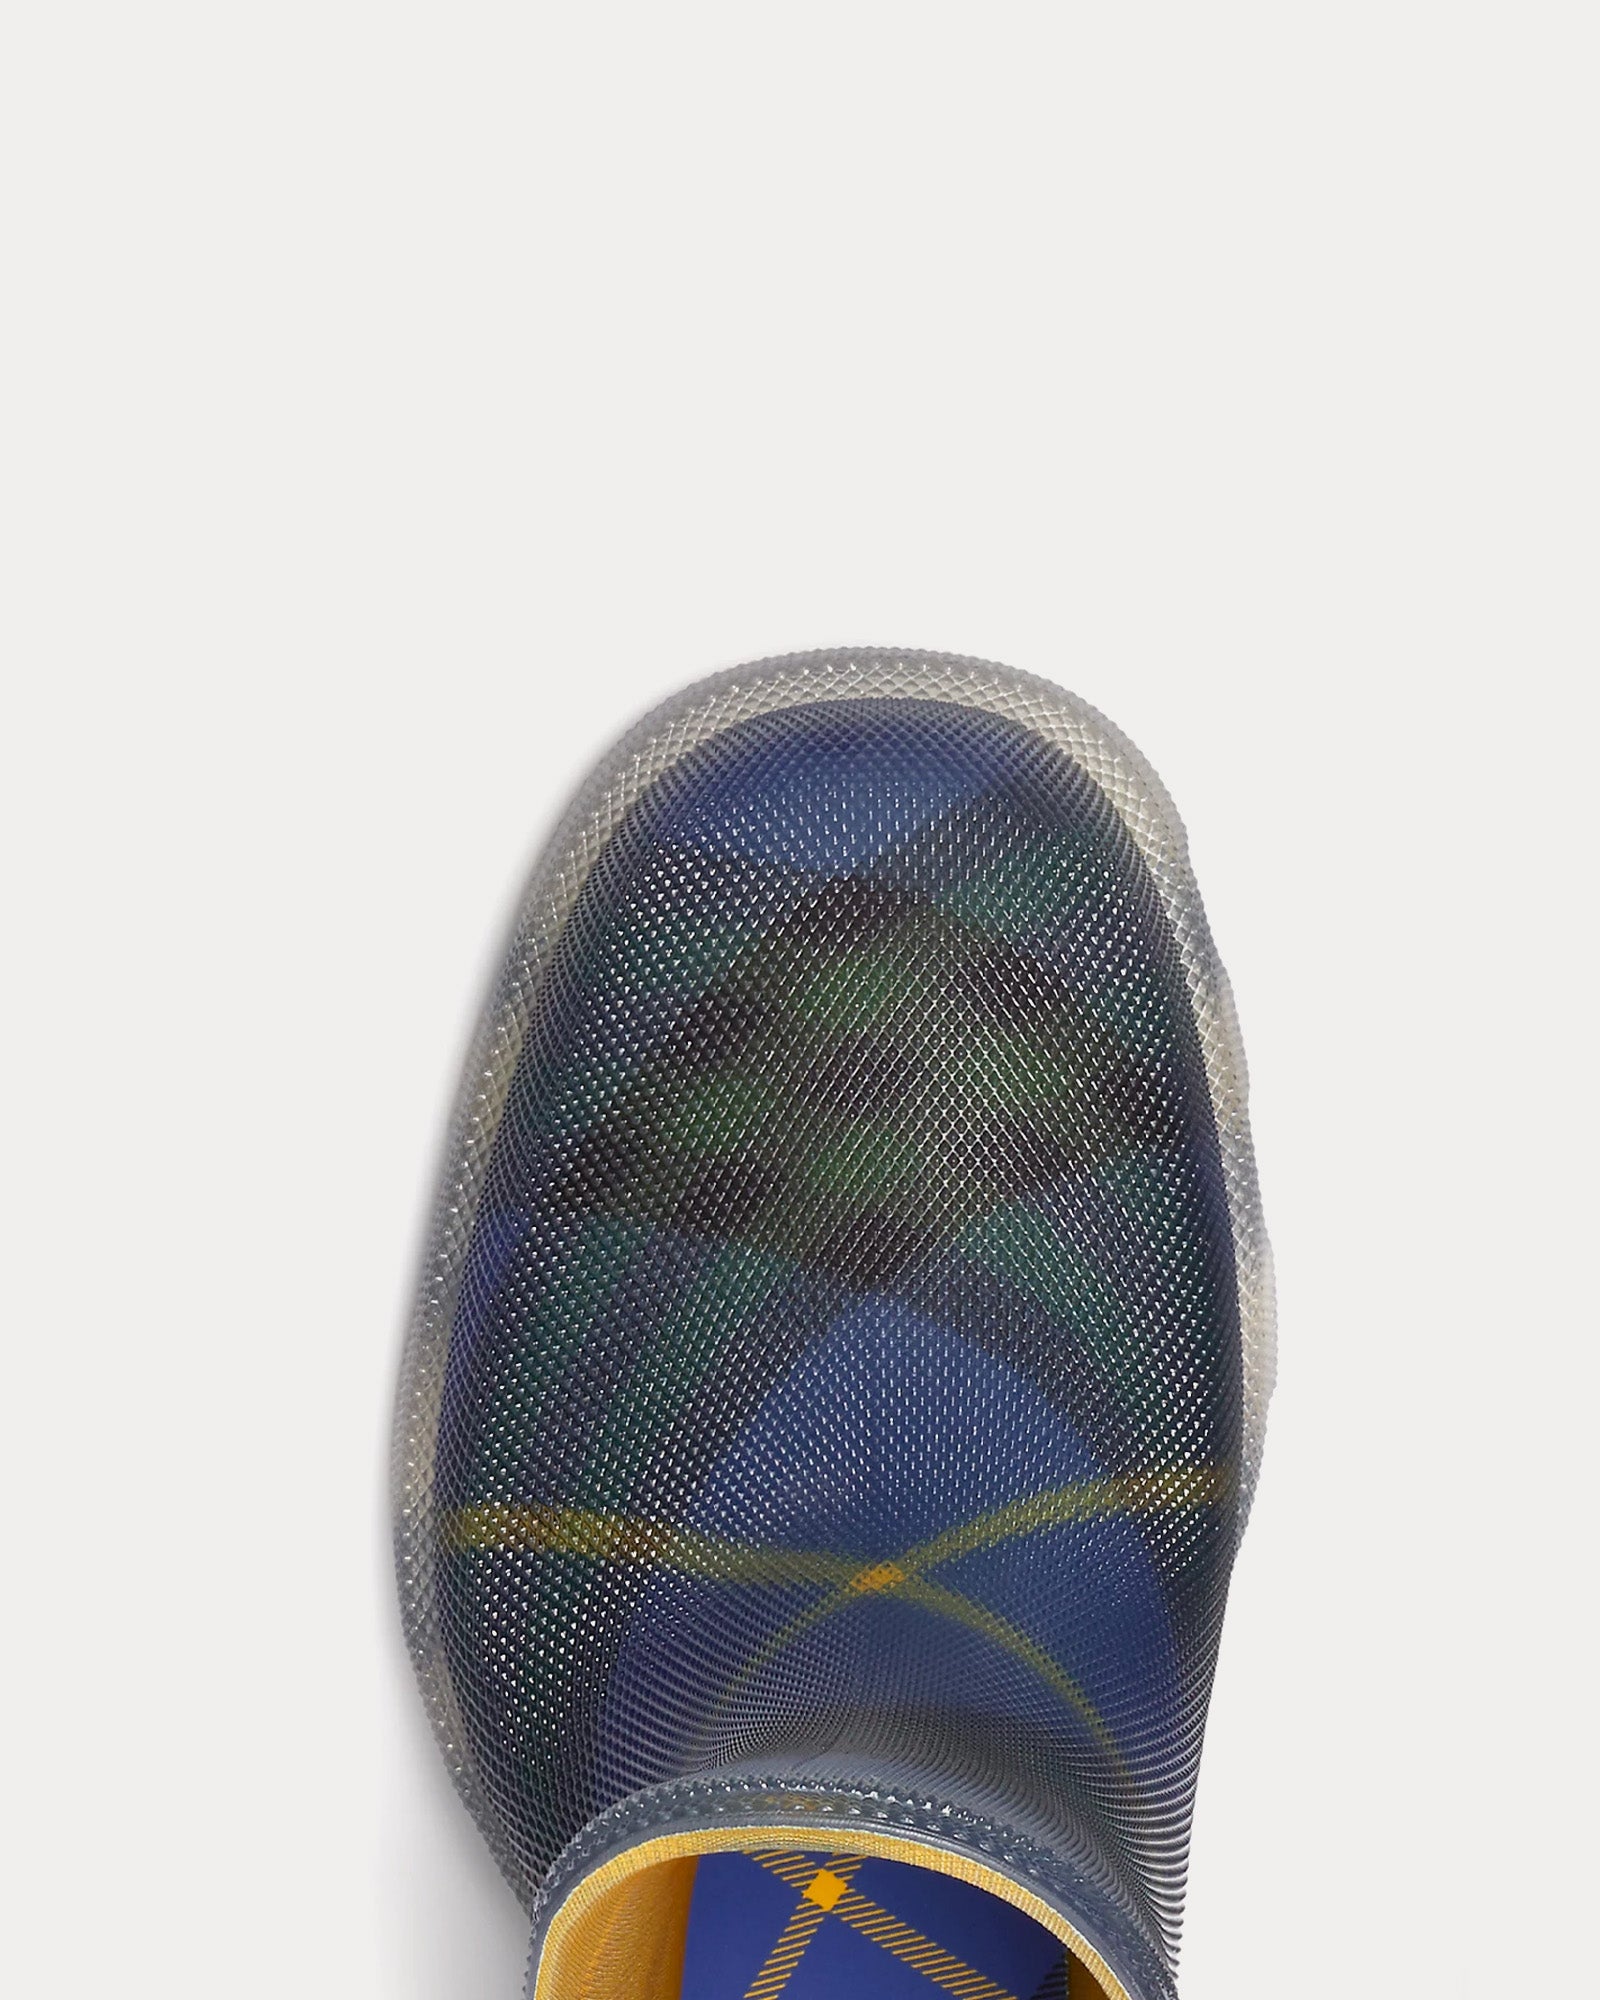 Burberry - Check Rubber Marsh Bright Navy Low Boots